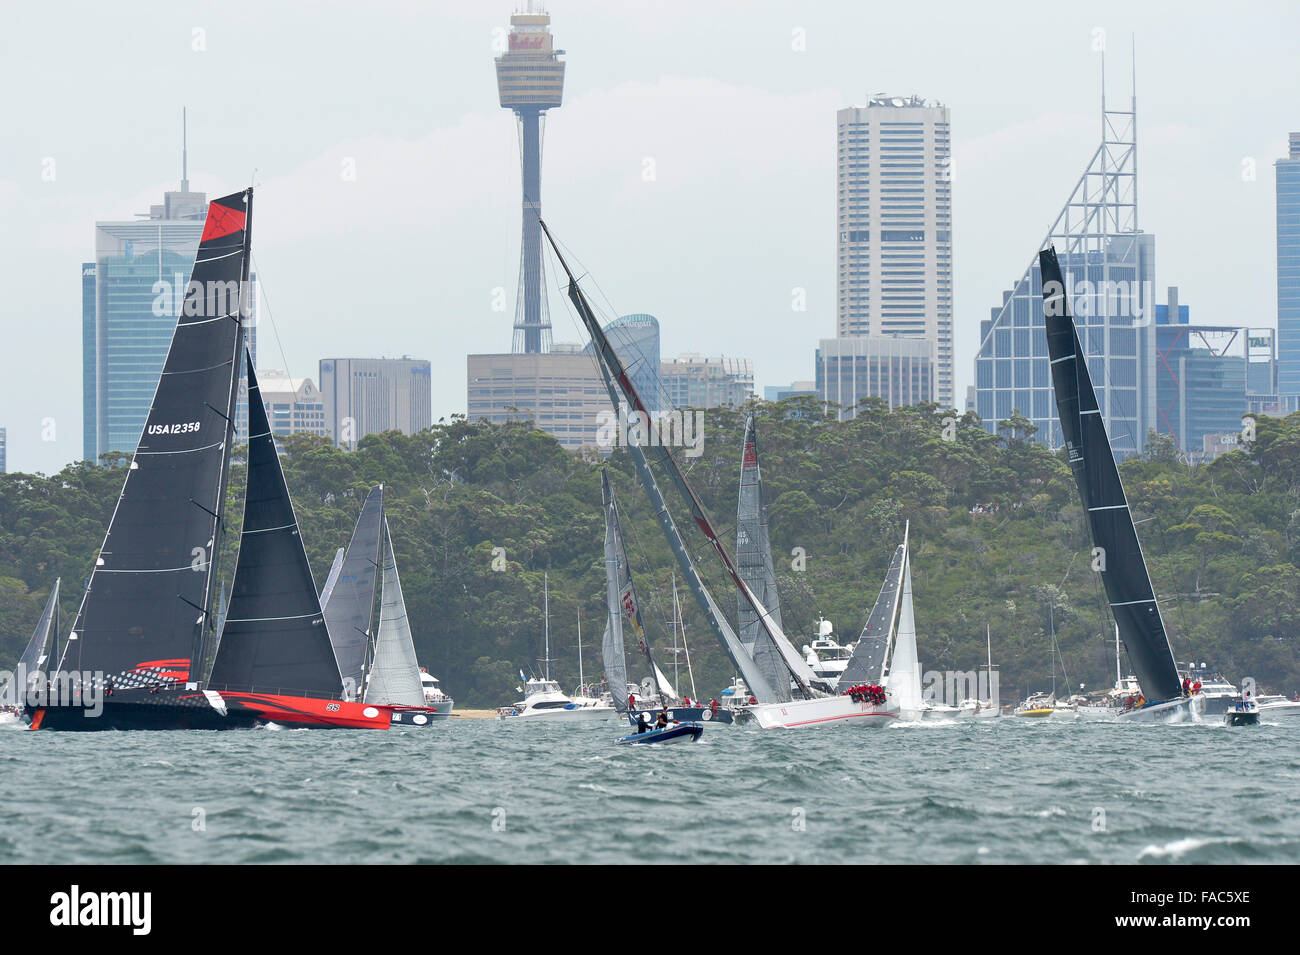 Sydney, Australia. 26th Dec, 2015. Rolex Sydney to Hobart Yacht race 2015. Comanche owned by Jim Clark &amp; Kristy Hinze Clark from SA skippered by skipper Ken Read type 100 Supermaxi, Wild Oats XI owned by Robert Oatley from NSW skippered by Mark Richards type RP100, Rambler owned by George David from the USA type Jk 27m Canting Maxi during the start of the 629 nautical mile race from Sydney to Hobart on Sydney Harbour. © Action Plus Sports/Alamy Live News Stock Photo